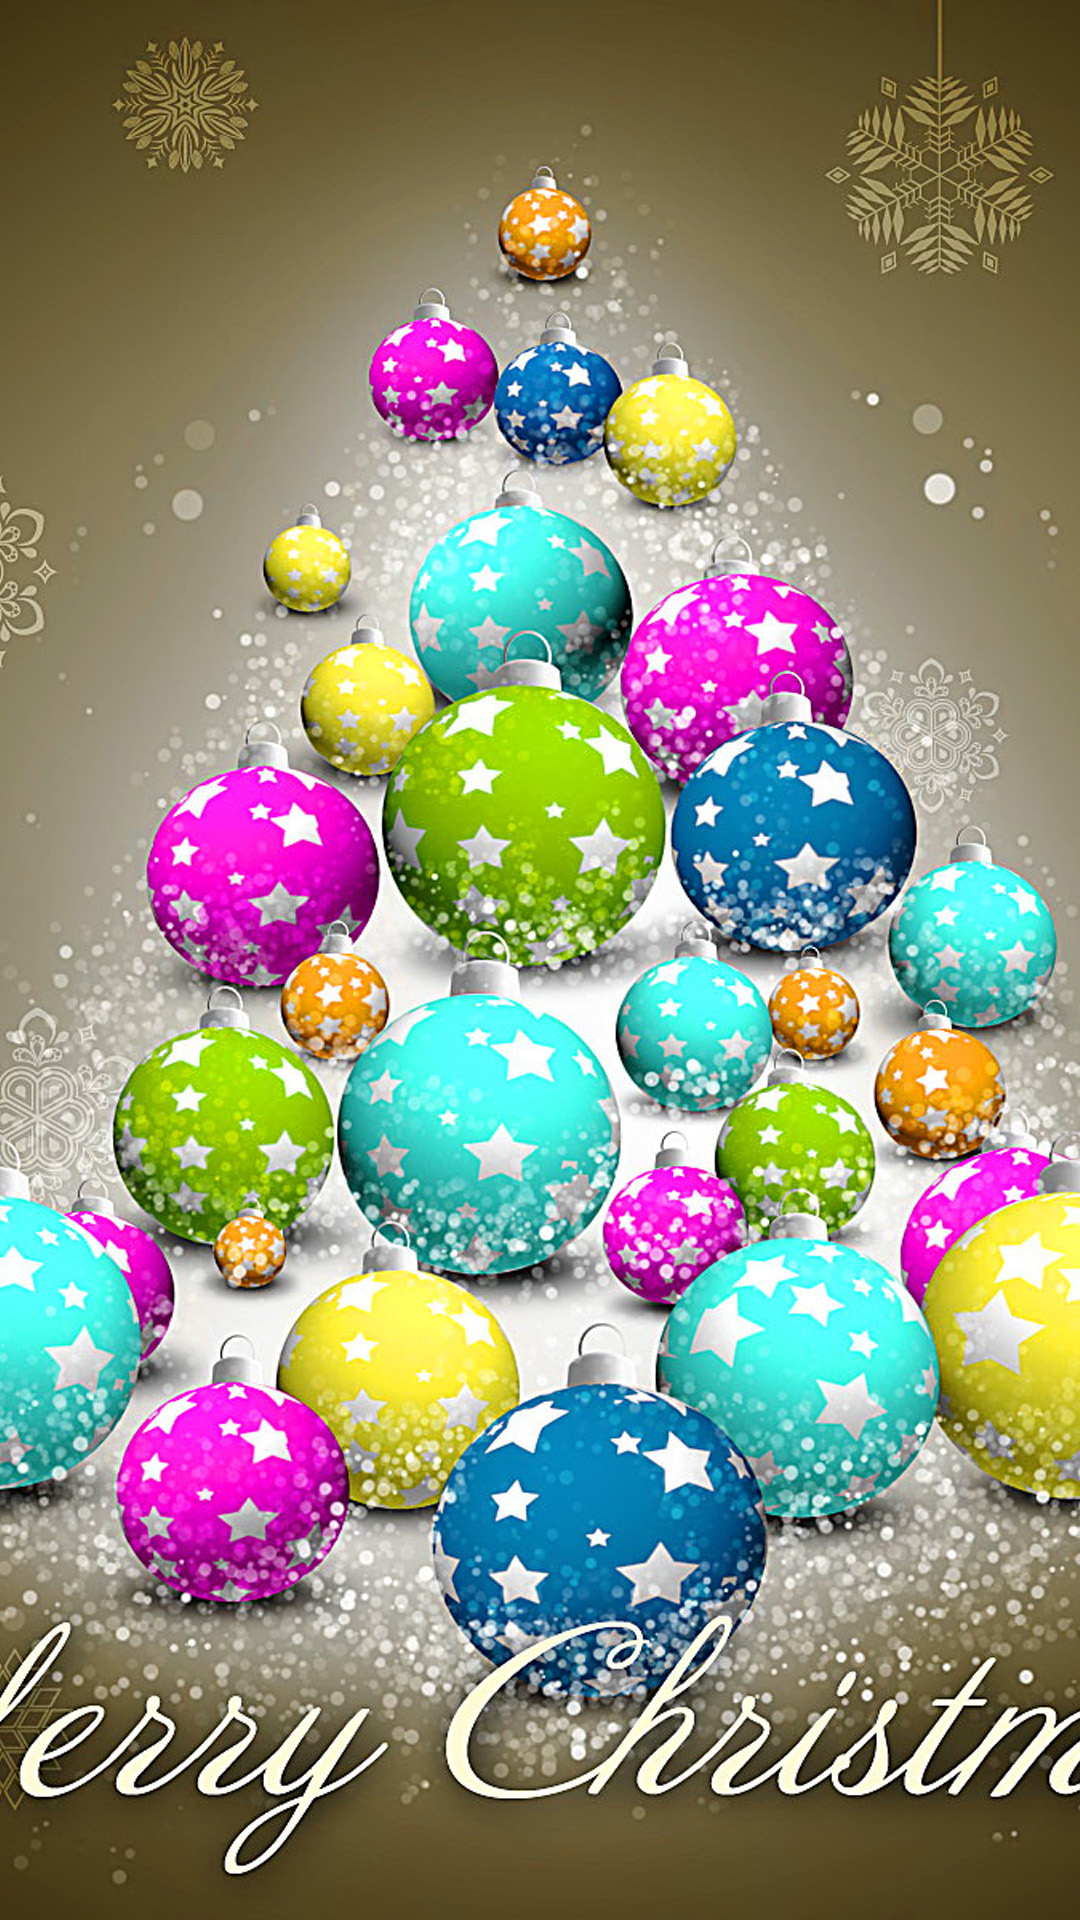 Colorful Merry Christmas Android Wallpaper - Colorful Merry Christmas - HD Wallpaper 